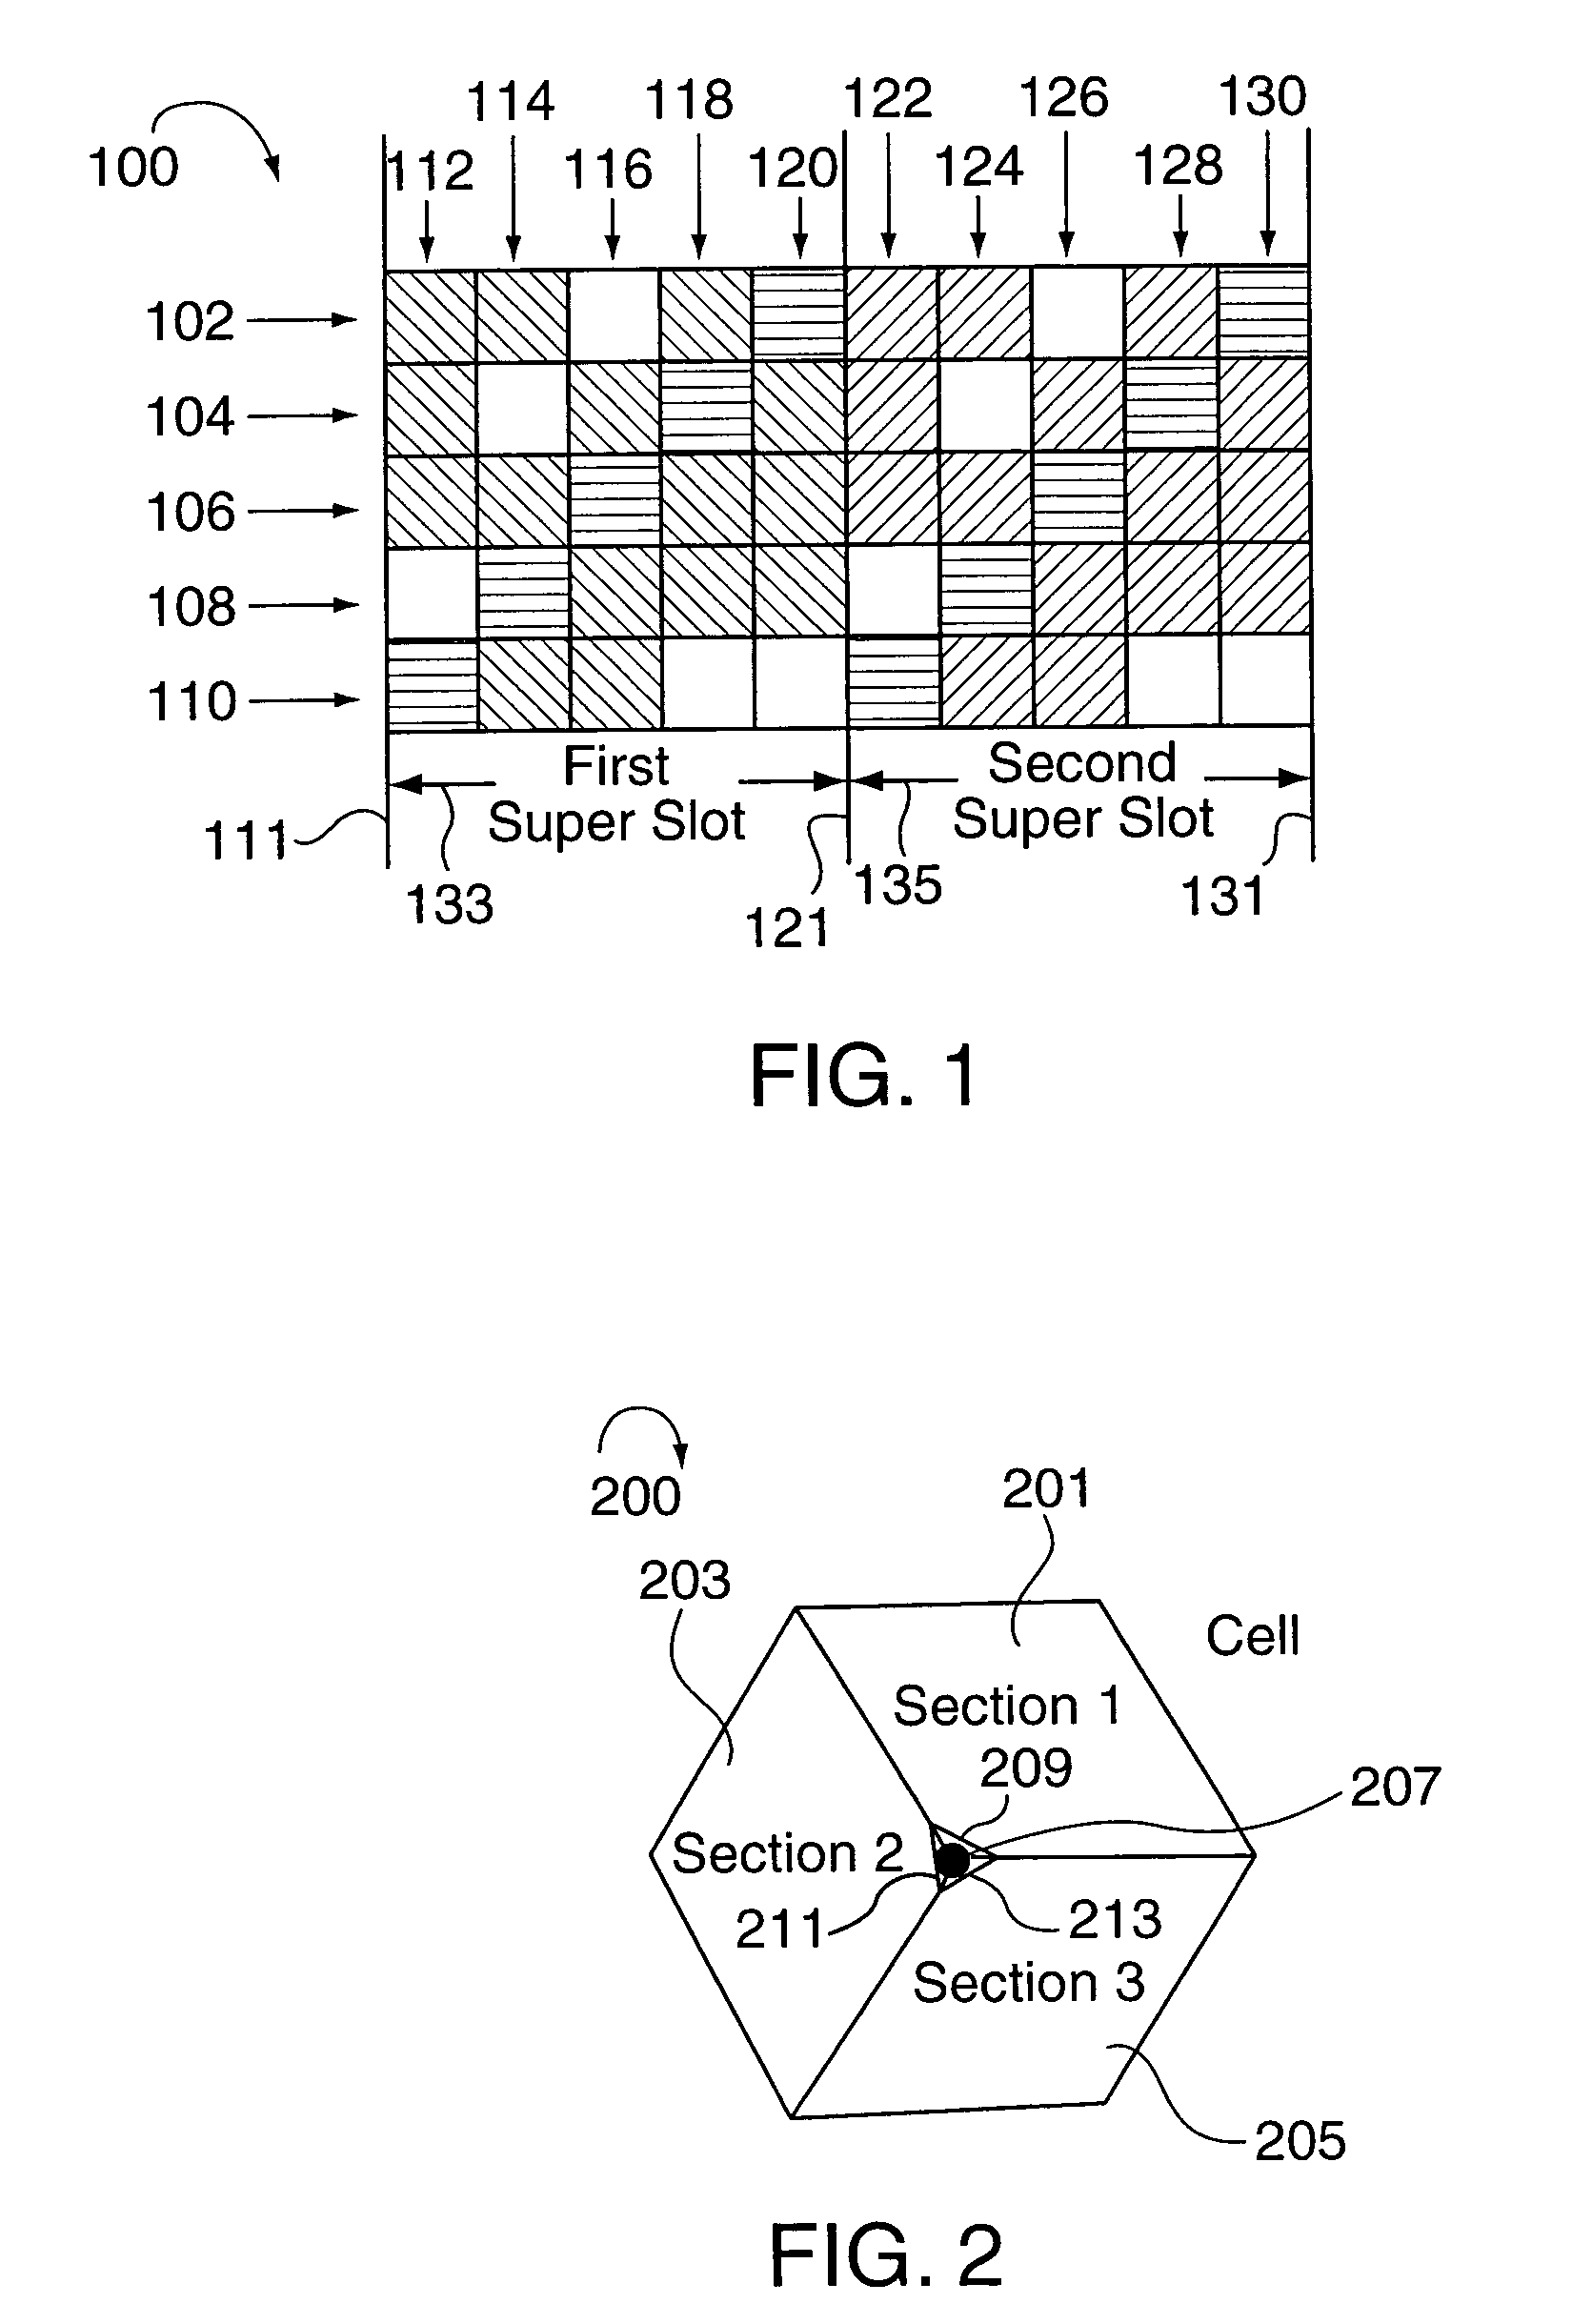 Beacon signaling in a wireless system